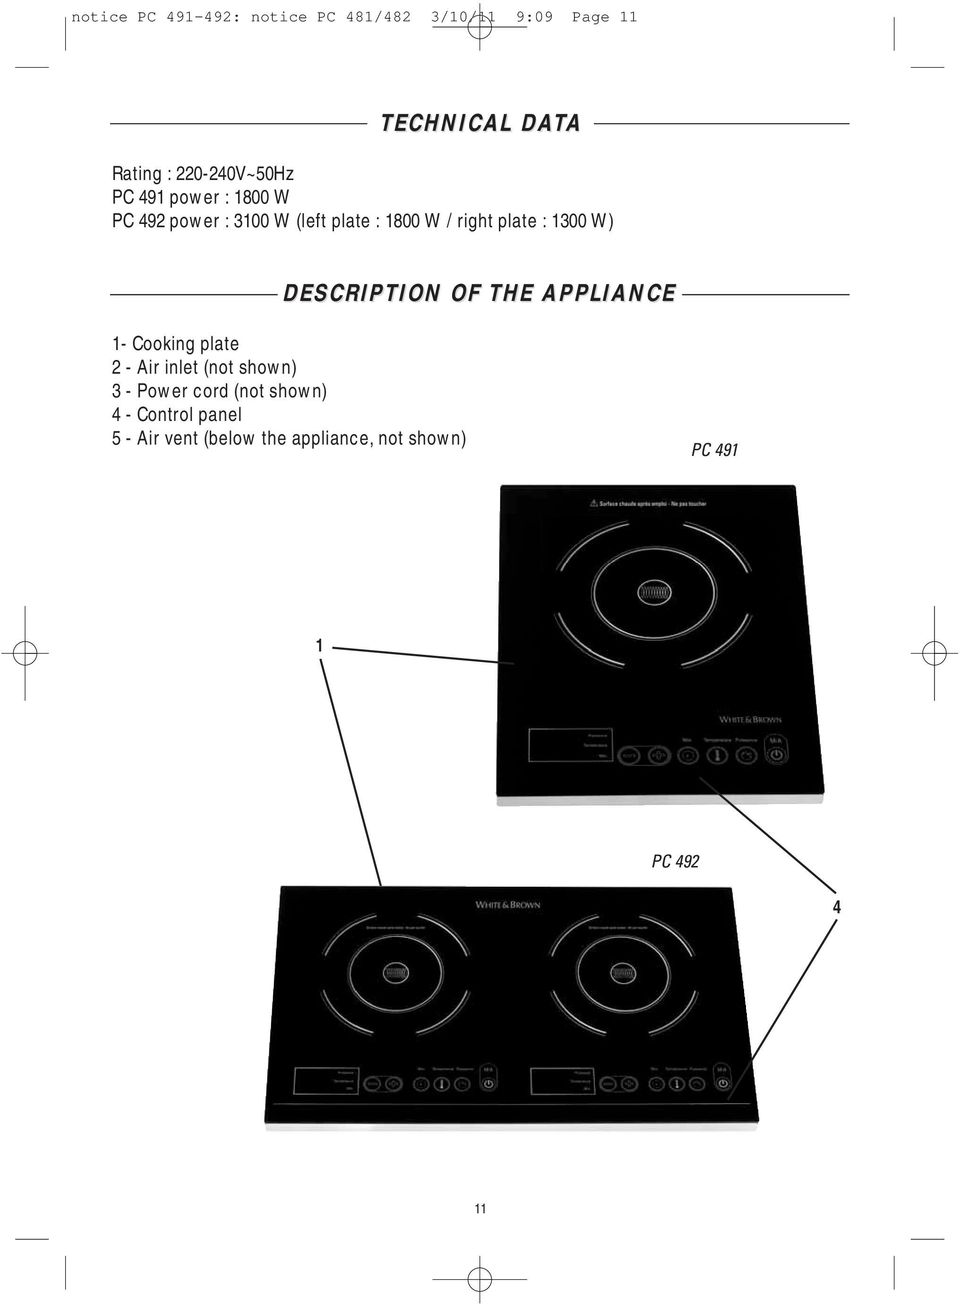 plate : 1300 W) DESCRIPTION OF THE APPLIANCE 1- Cooking plate 2 - Air inlet (not shown) 3 -